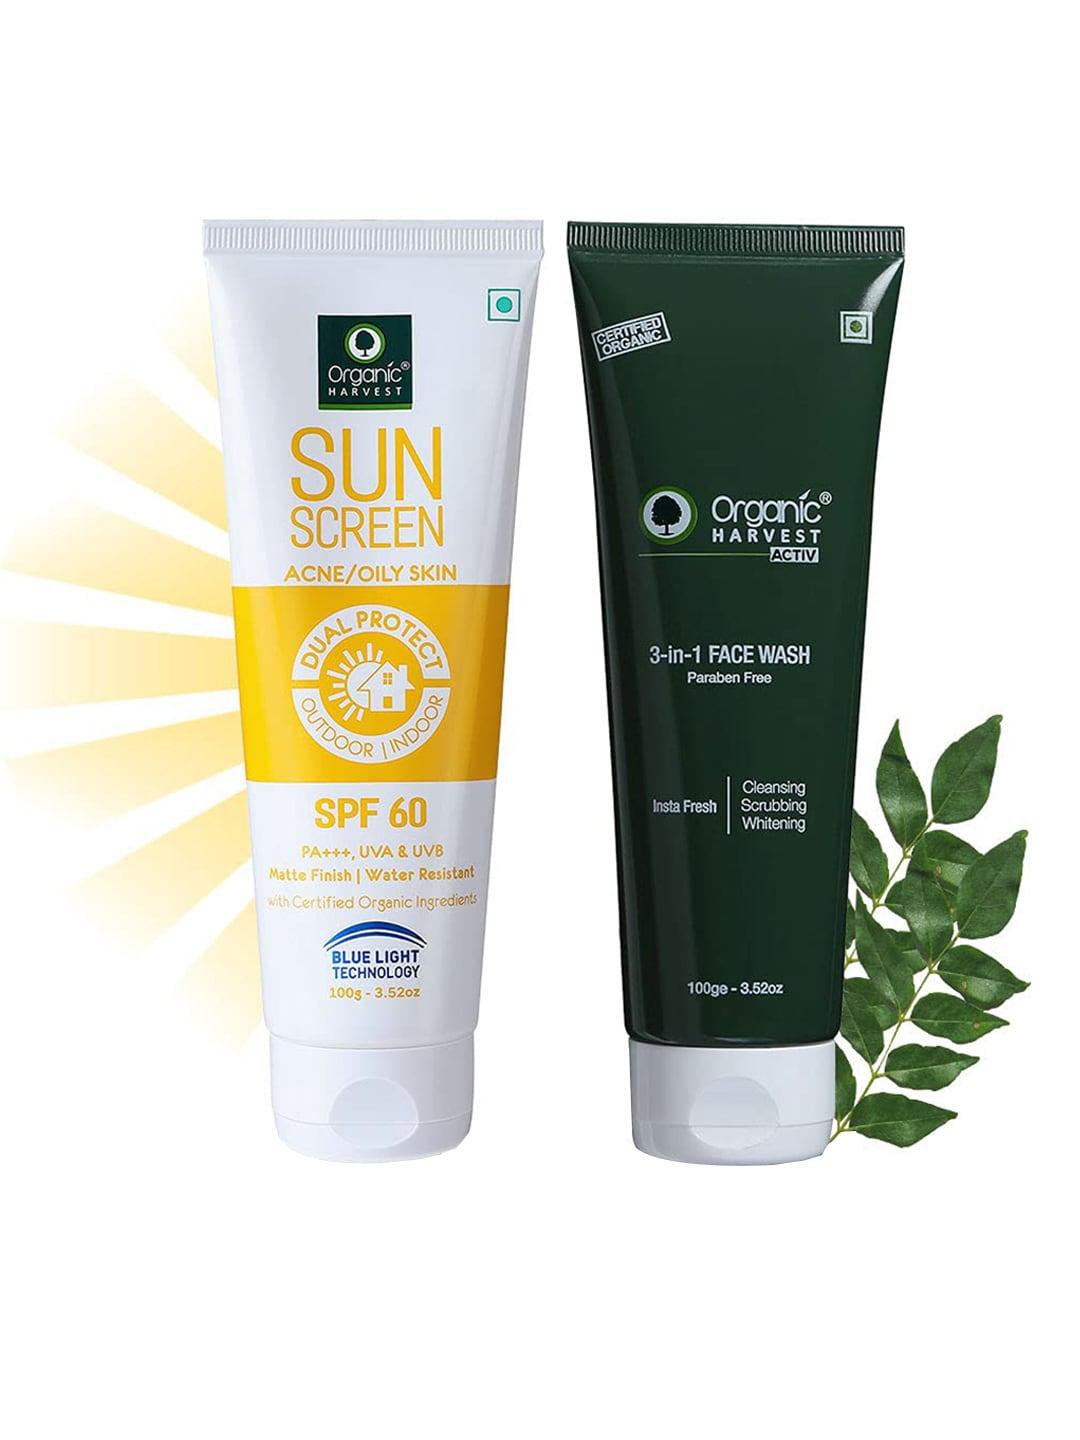 Organic Harvest 3-in-1 Face Wash & Sunscreen SPF60 Combo for Oily Skin - 100g each